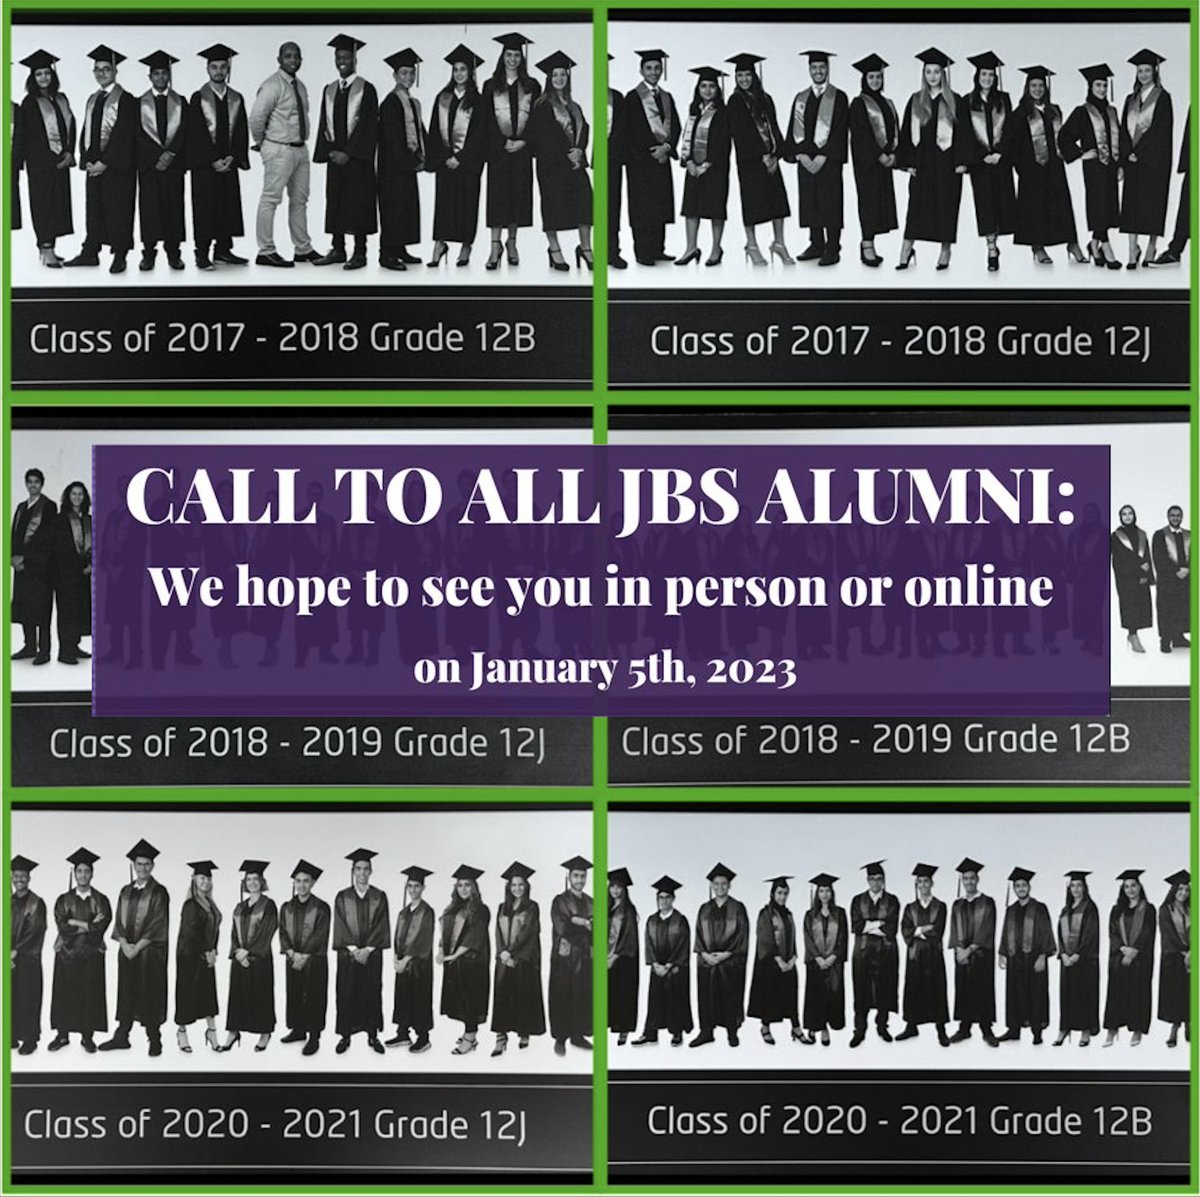 JBS Alumni reunion on 5th January 2023. Calling out to all old students to reconnect with their school. Please email alumnisociety@jbschool.ae; we would love to know more about you. #jbs #jbschool #ibschool #proudlytaaleem